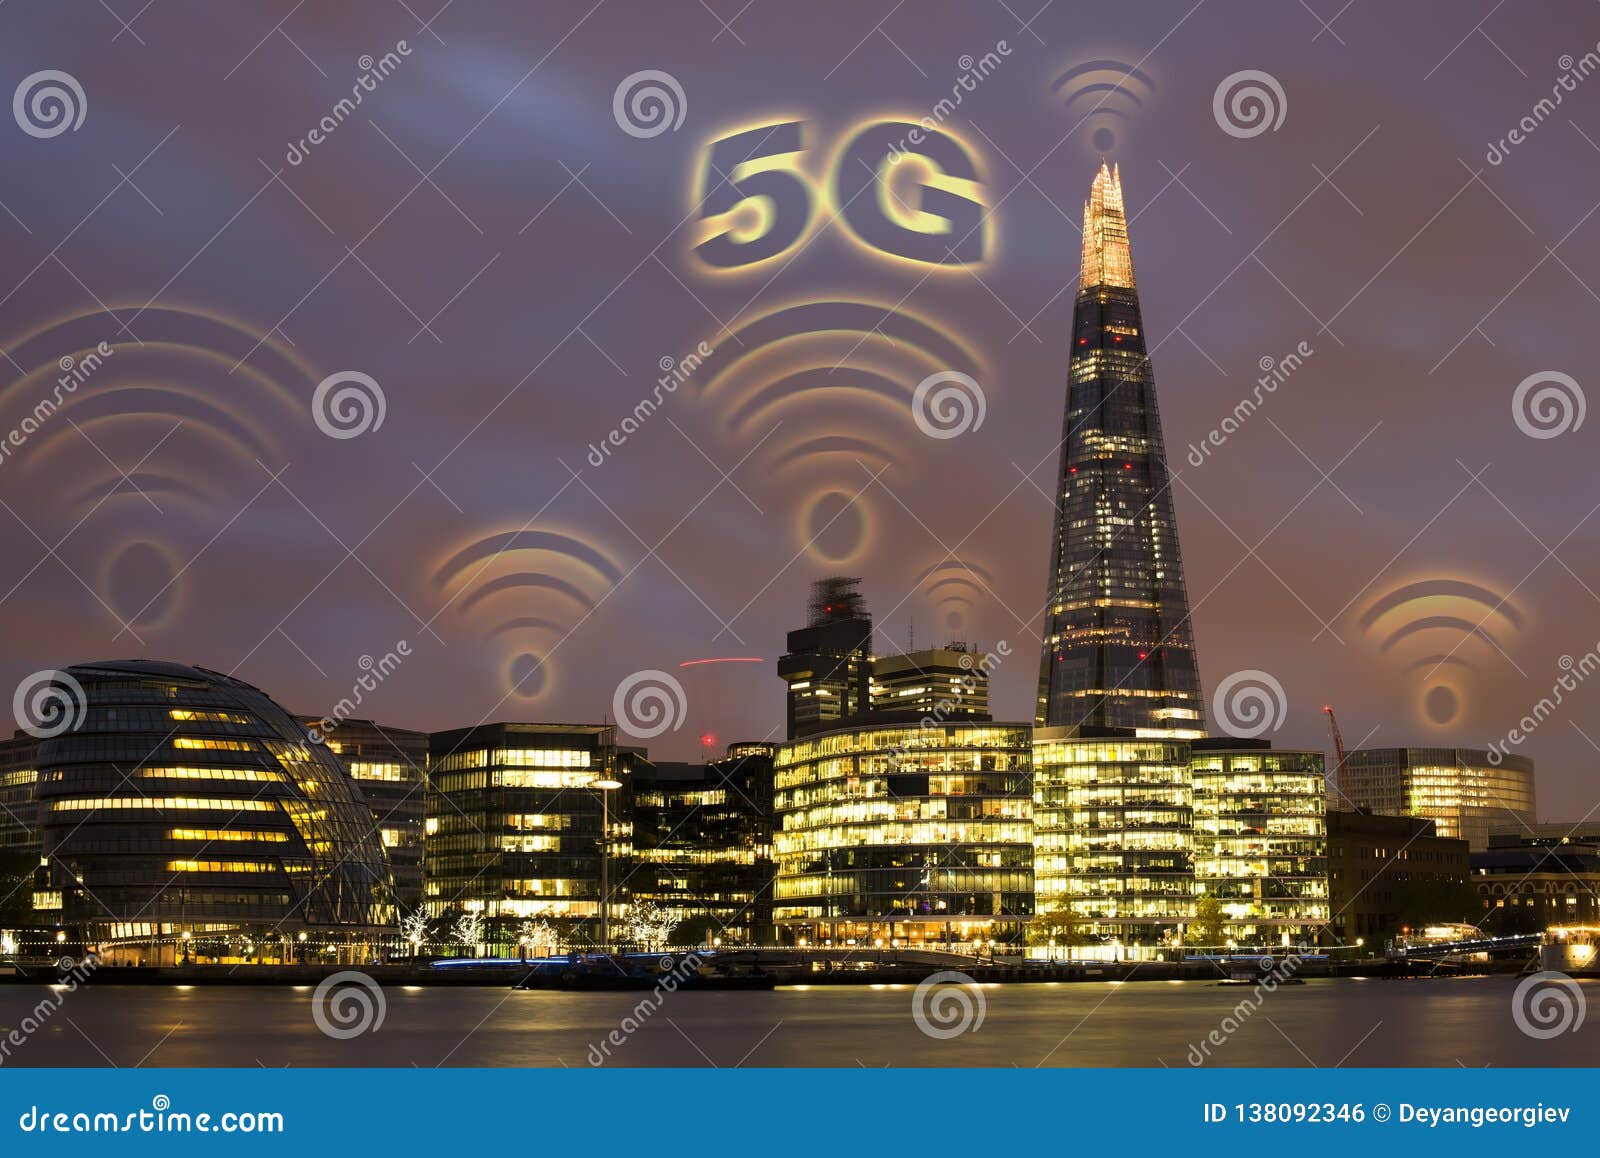 5g concept in the city. many wireless s on the top of the buildings